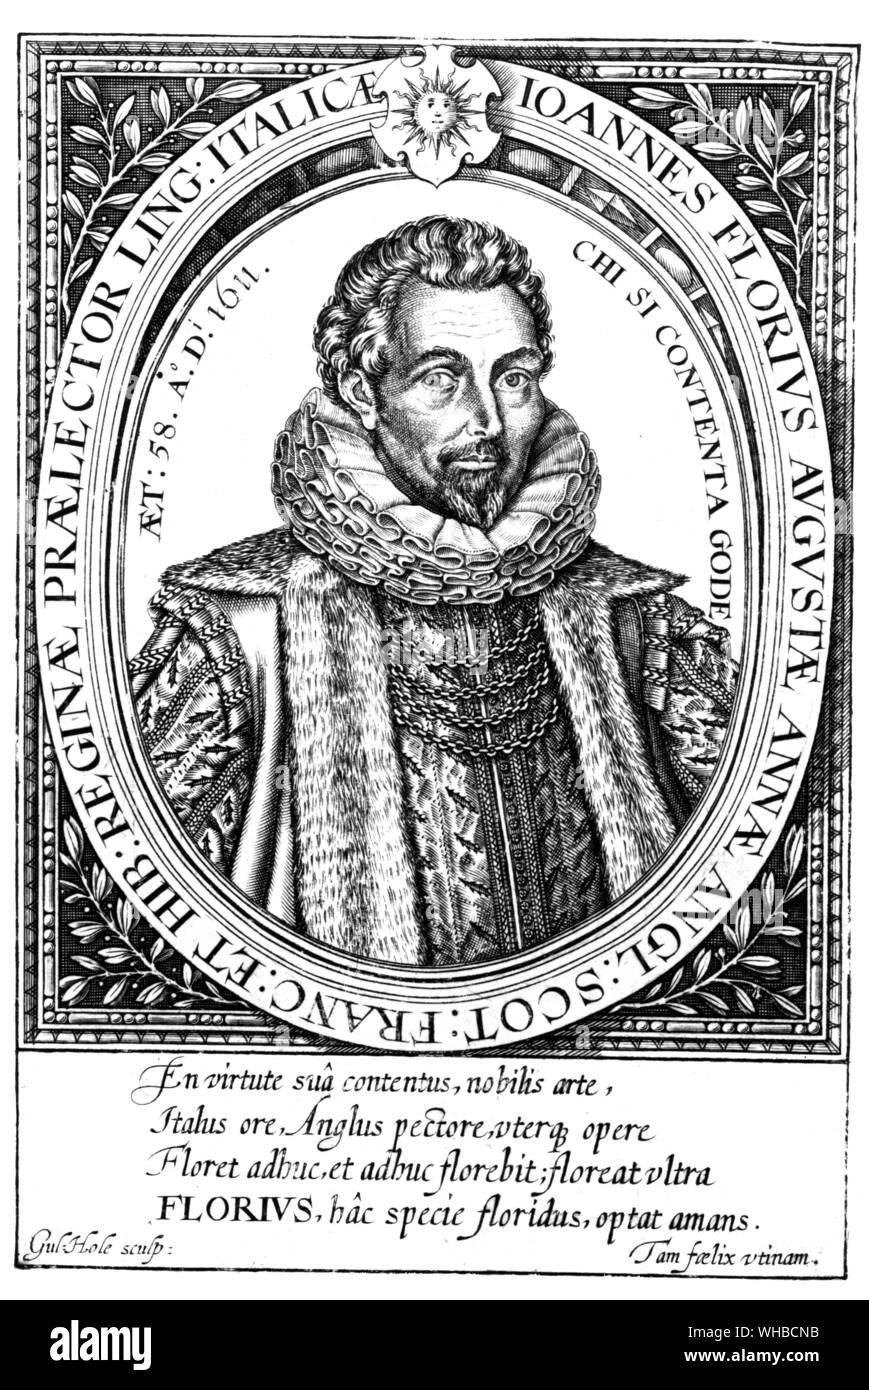 Secretary to Southampton and translator of Montaigne , John Florio was reputedly carried away by words , a condition that one of his readers , William Shakespeare , did not always escape .. Engraving by W Hole on the frontispiece to John Florio's dictionary in English and Italian , 1611 edition entitled Queen Anna's New World of Words Stock Photo